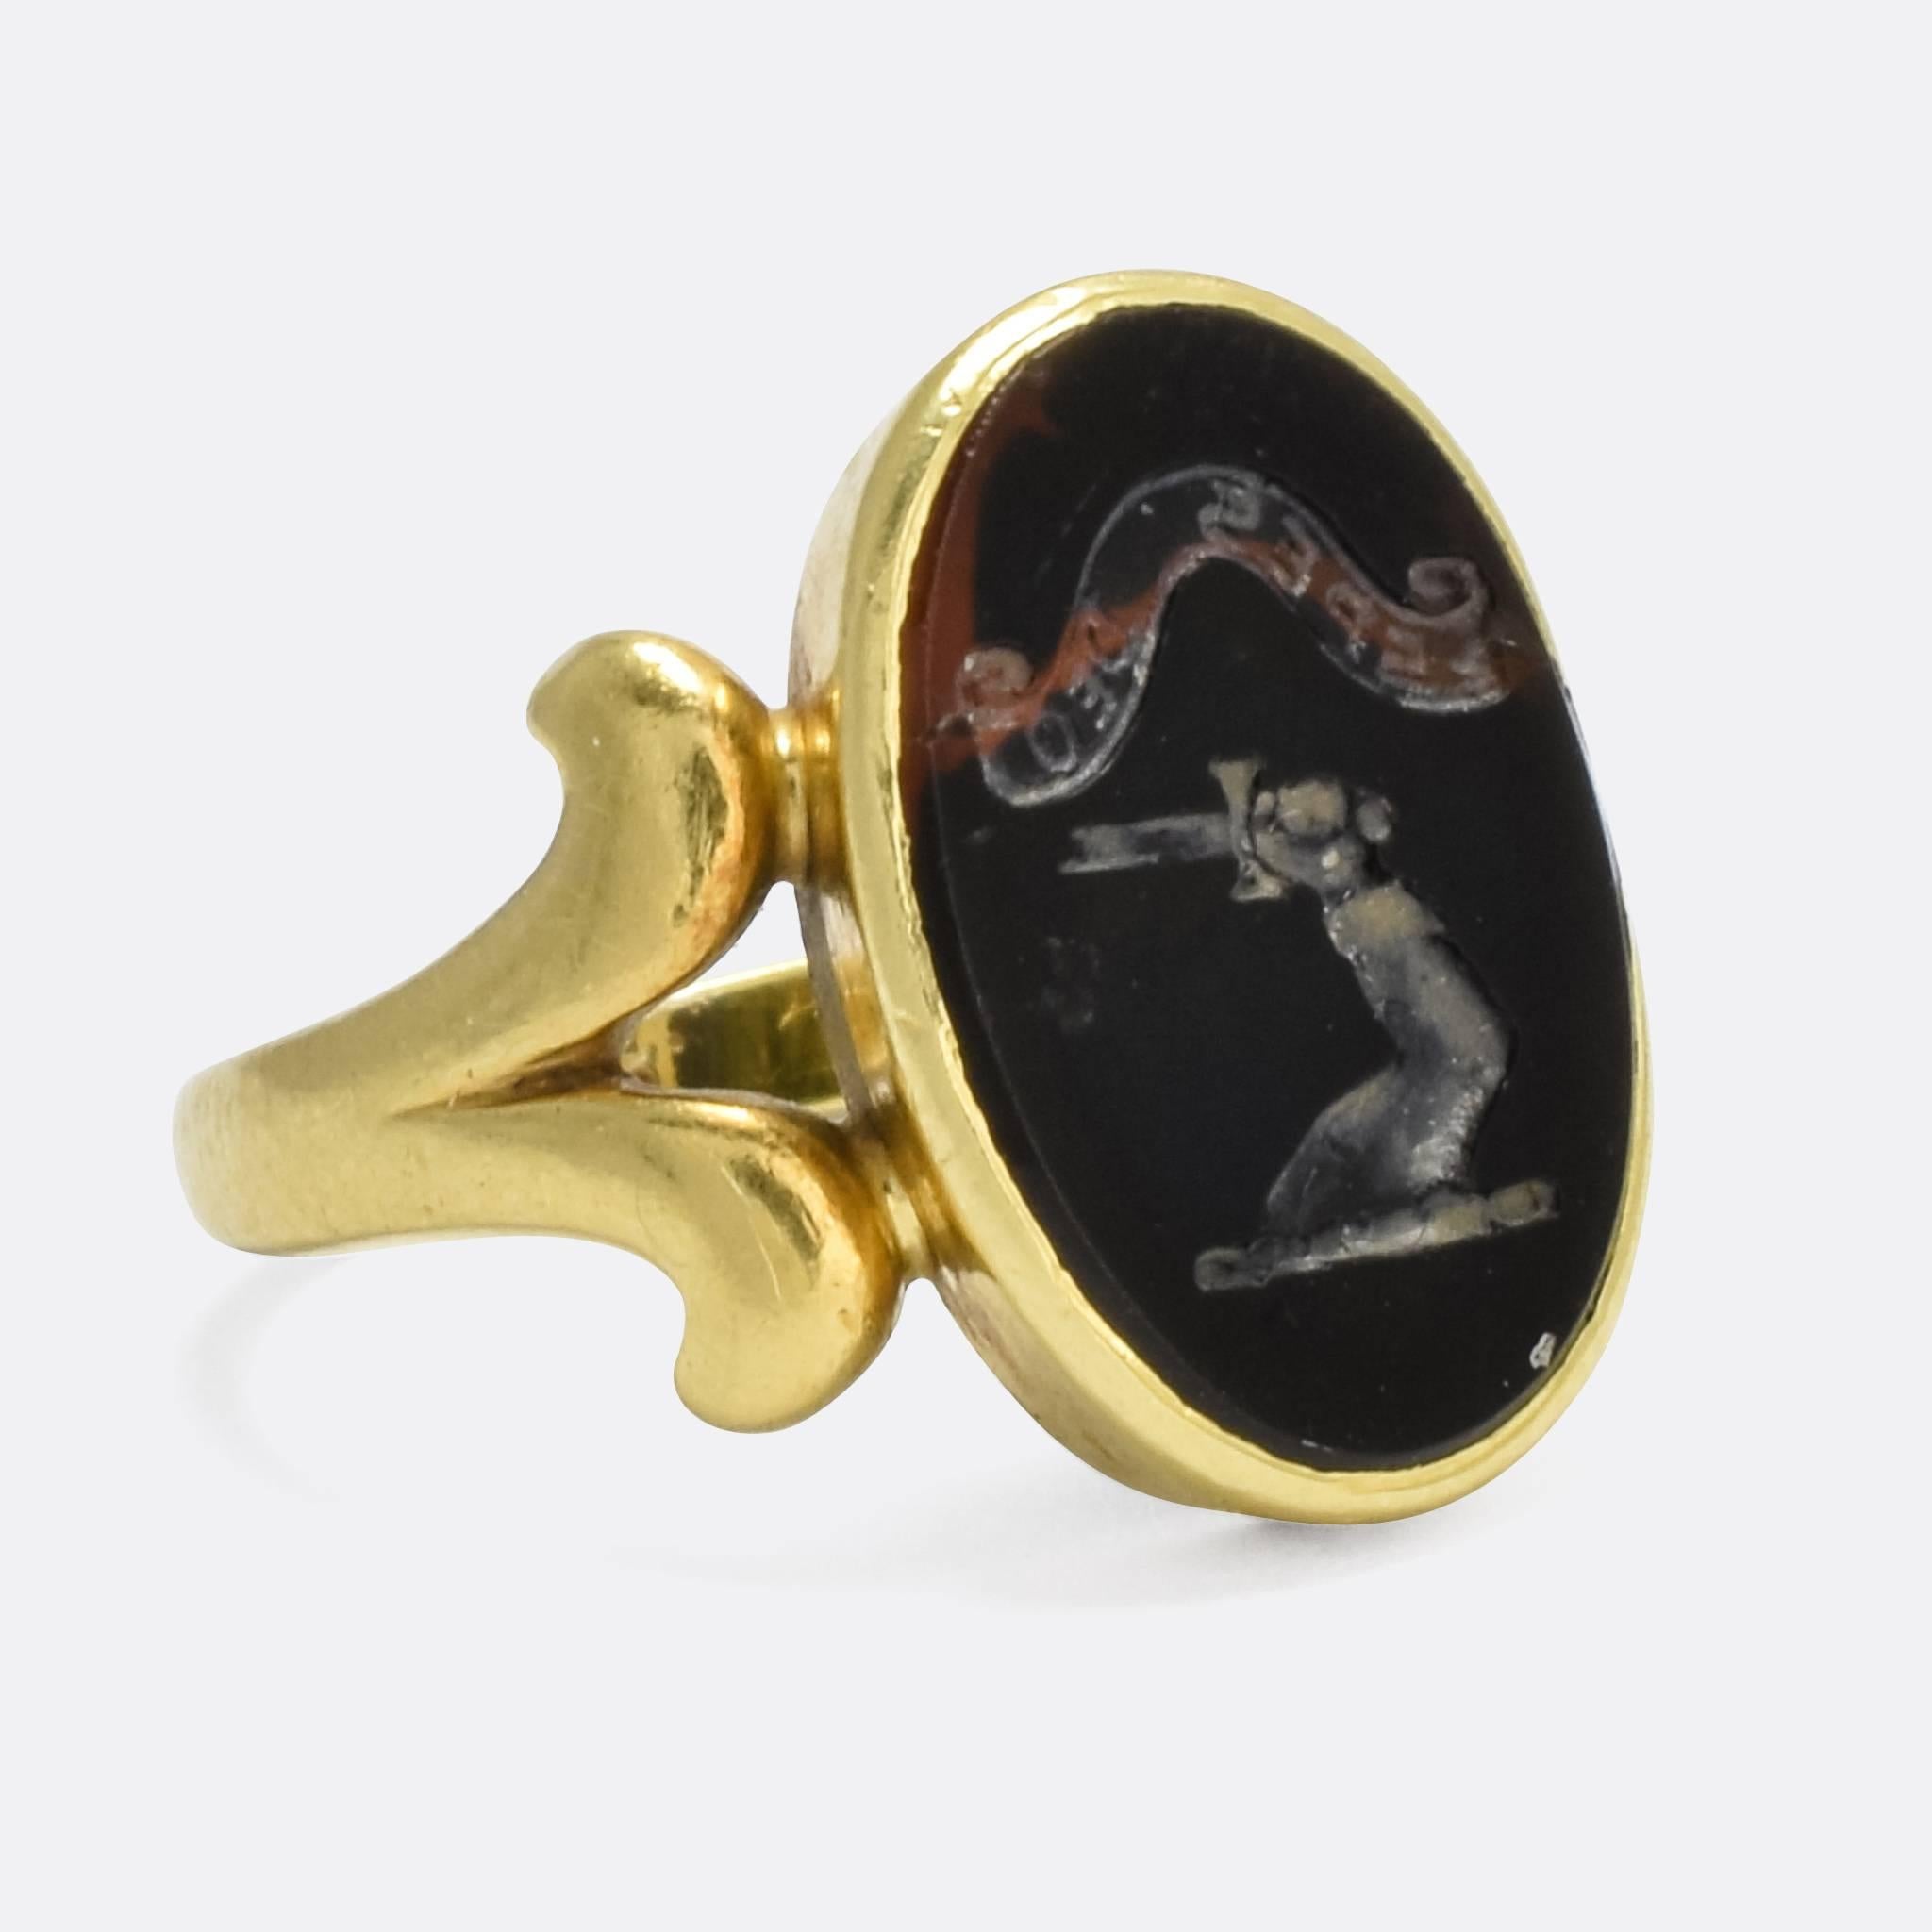 A cool antique signet ring with an intaglio bloodstone panel. The oval stone is carved with an English heraldic crest and motto: an arm upstretched holding a broken sword, beneath the words 